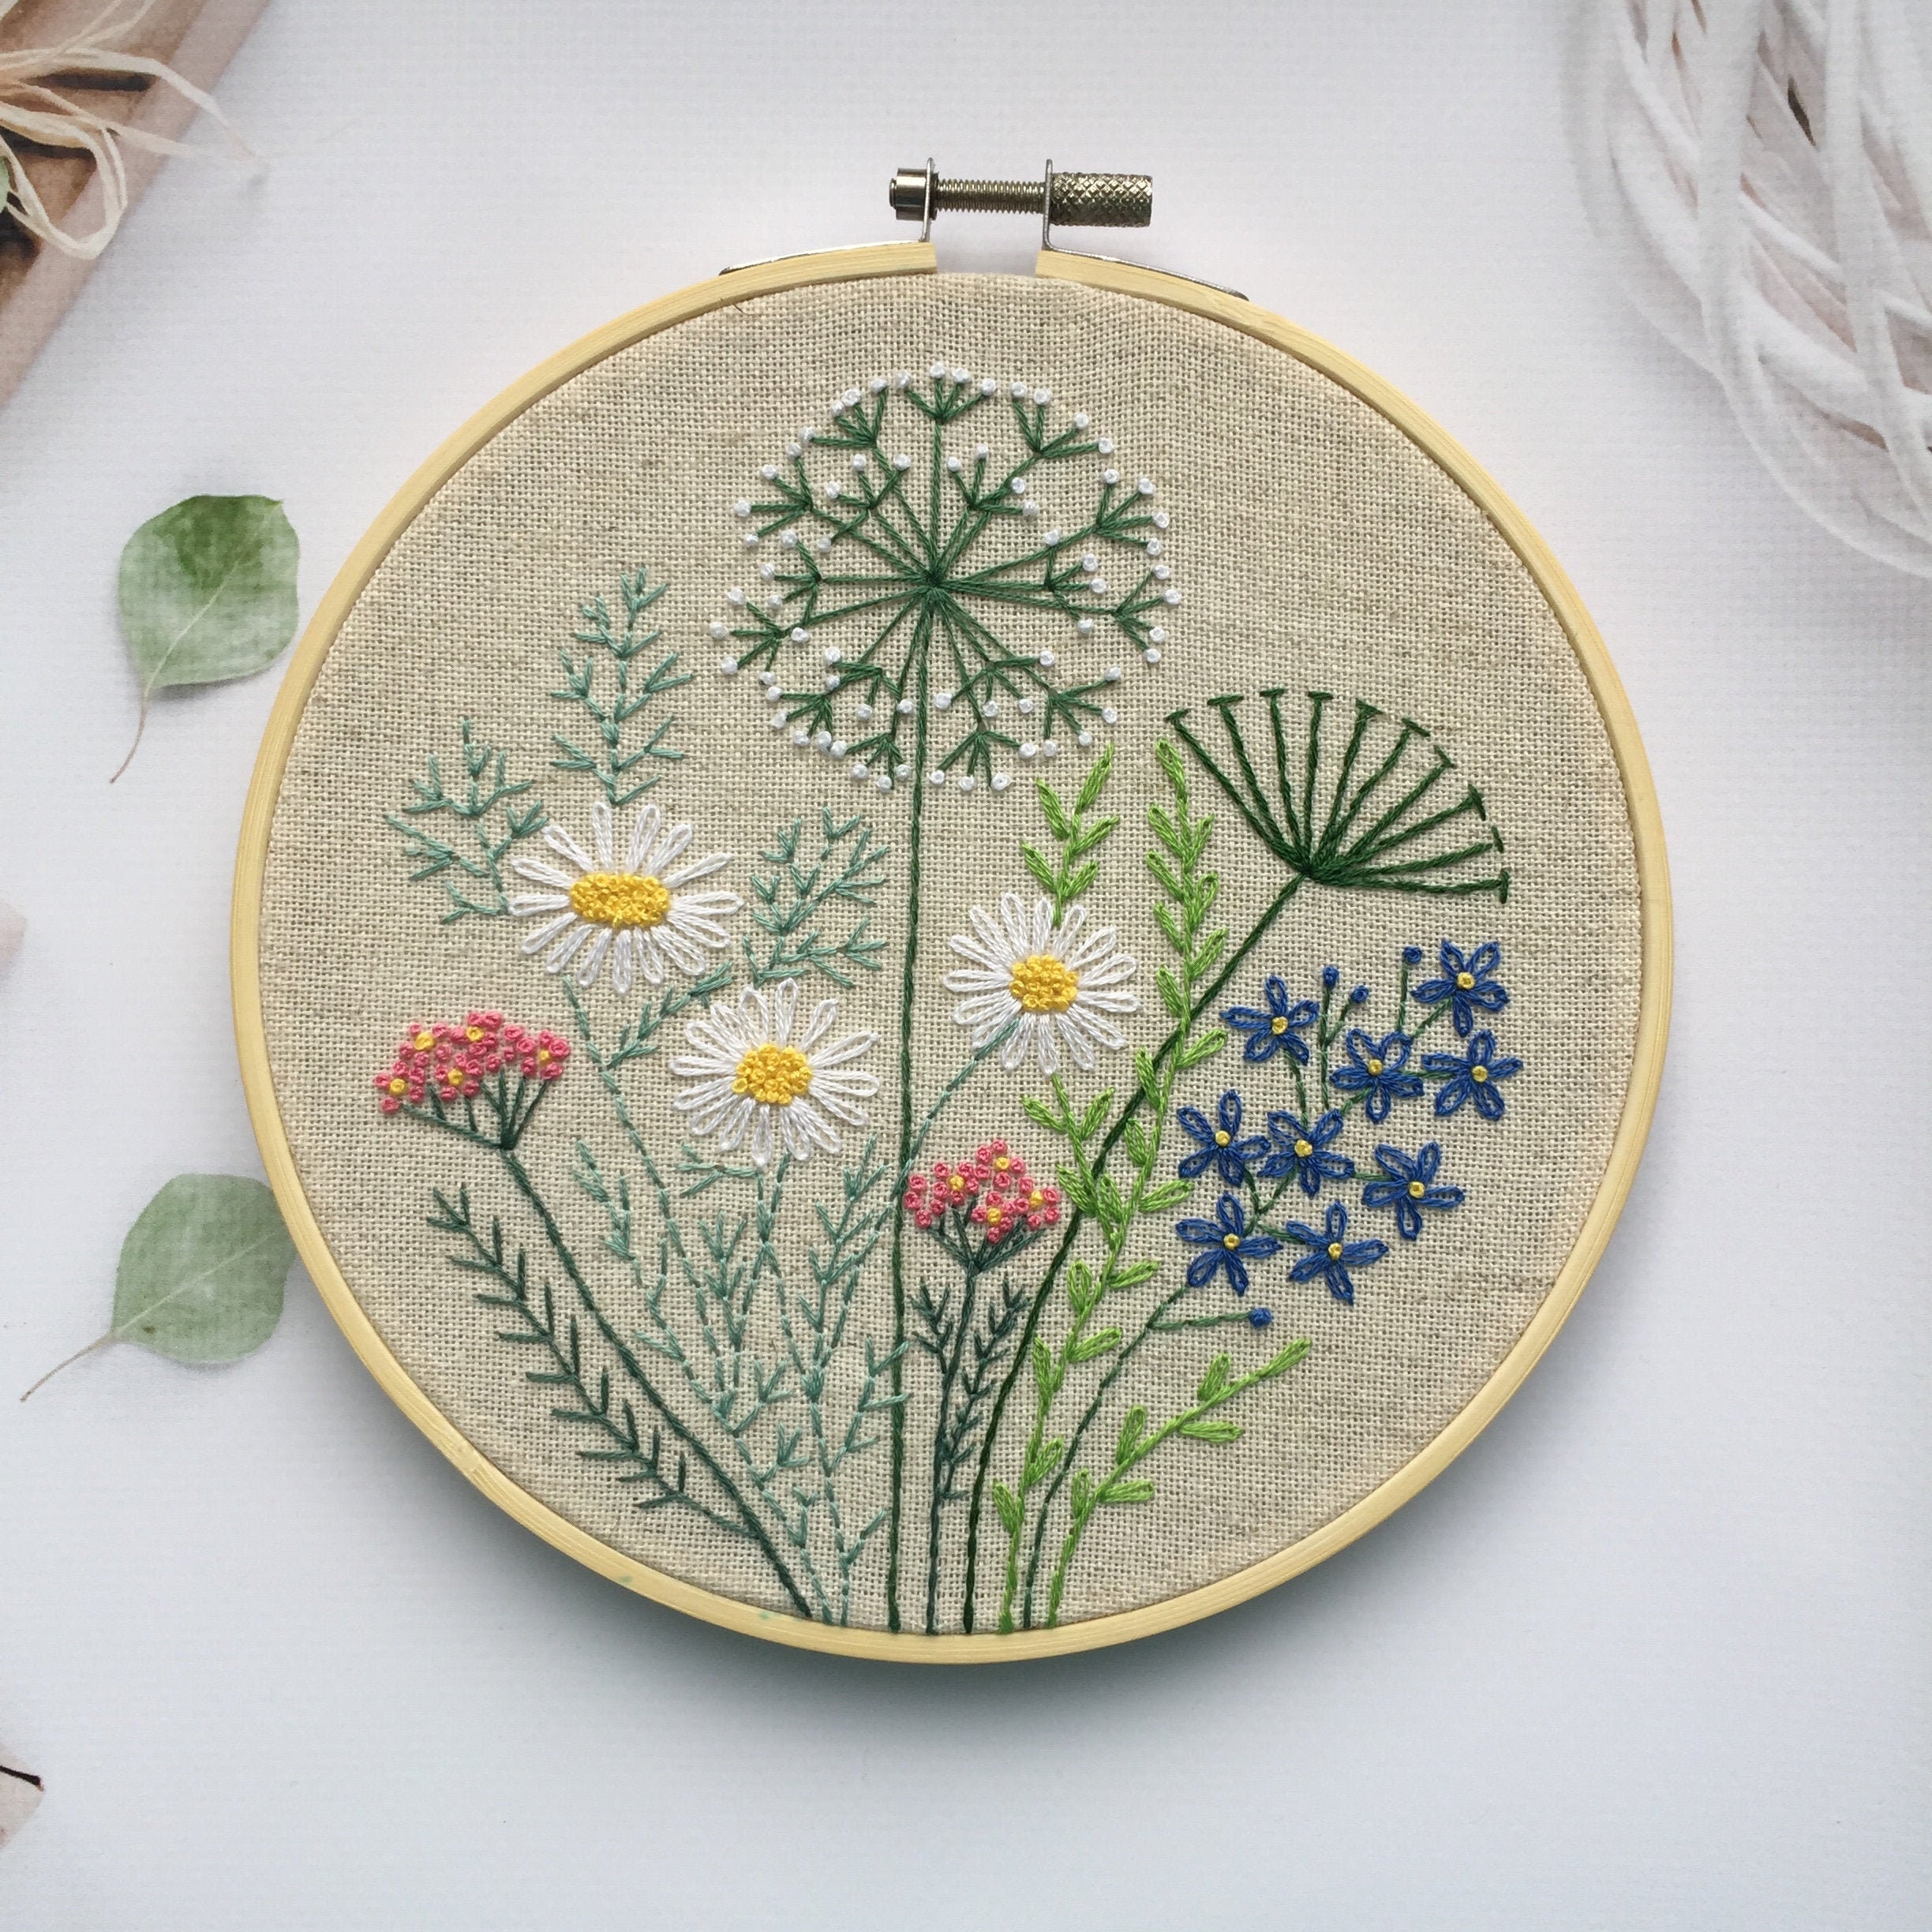 Creative Embroidery Flowers and Herbs Pattern 5, Needlepoint